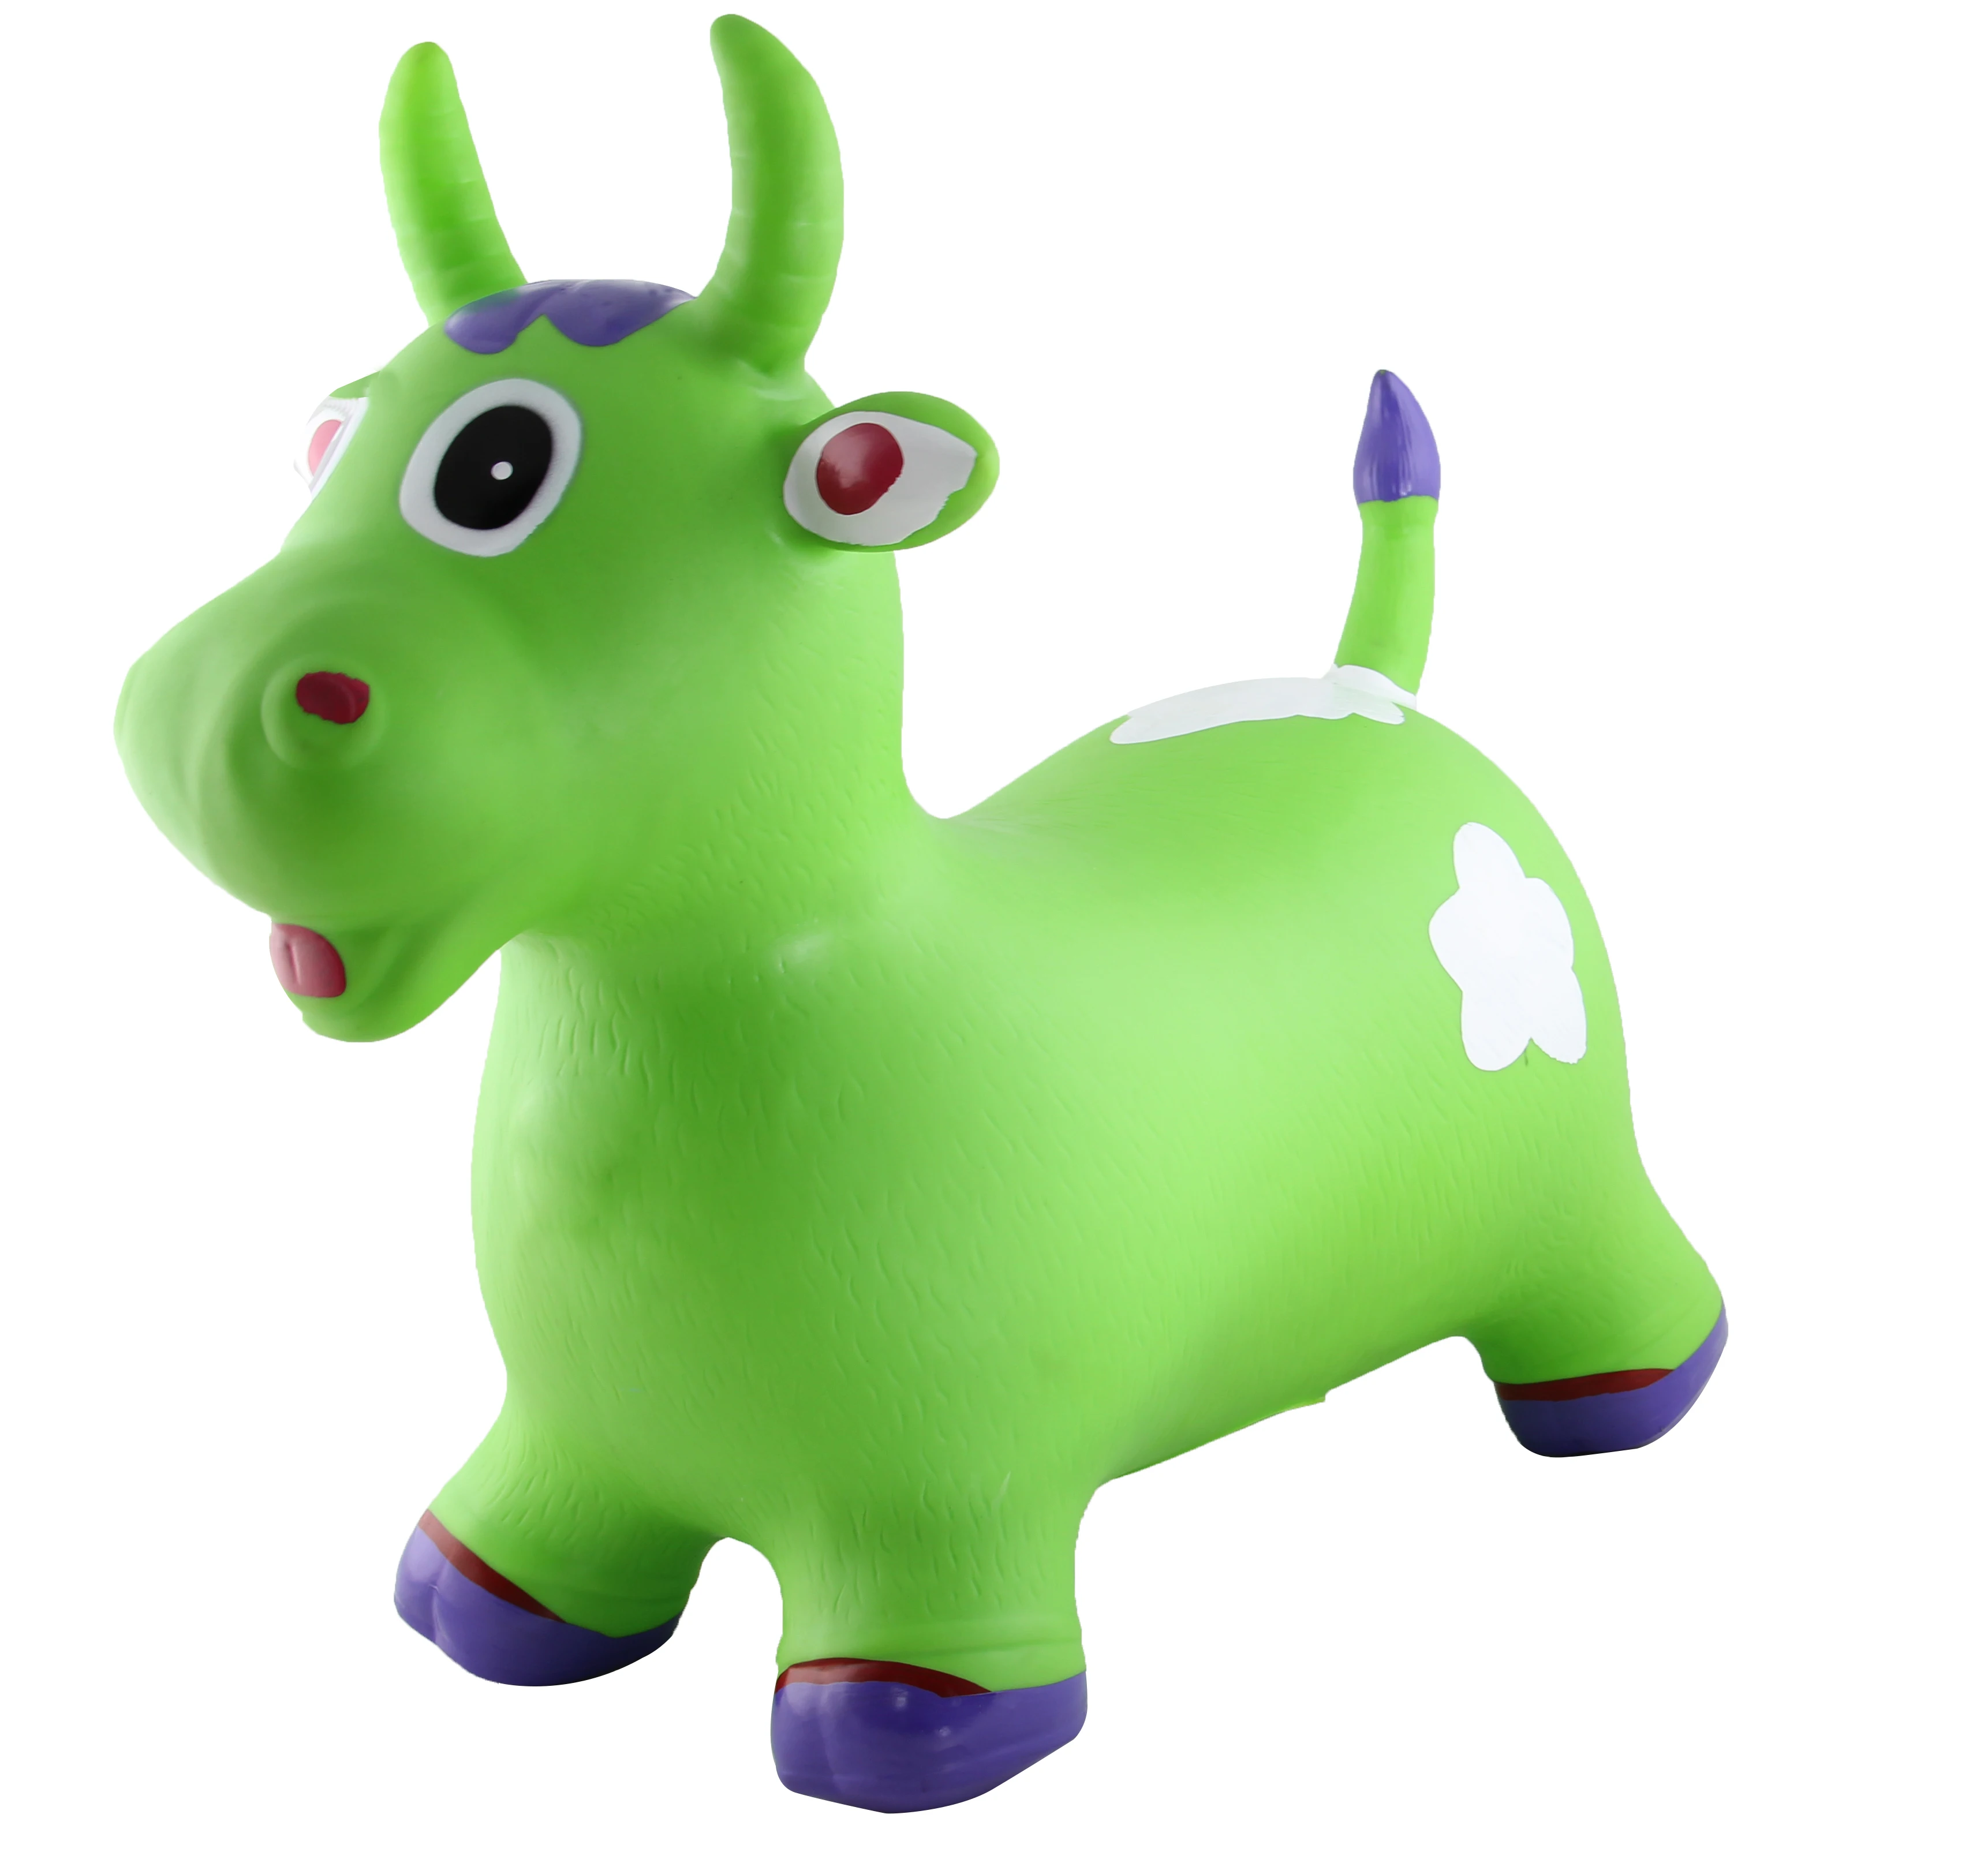 Jumping Animal Toys-green Cow Other Toy Animal Soft PVC